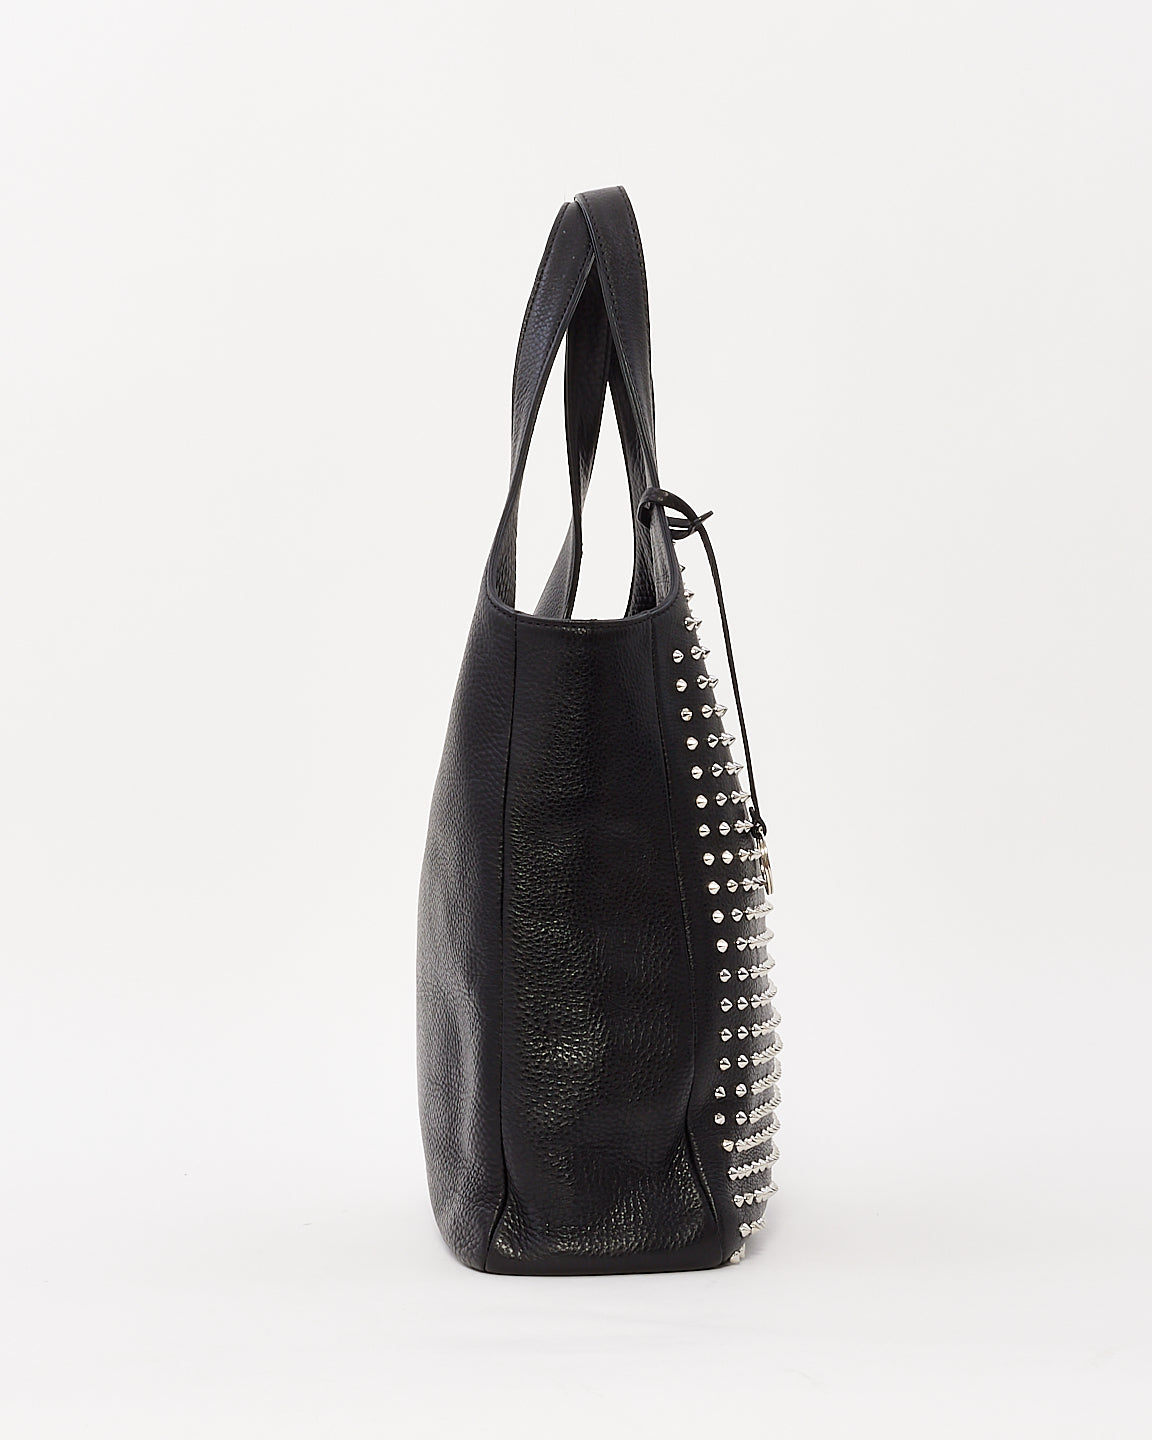 Burberry Black Leather Hobo Bag with Silver Metal Studs